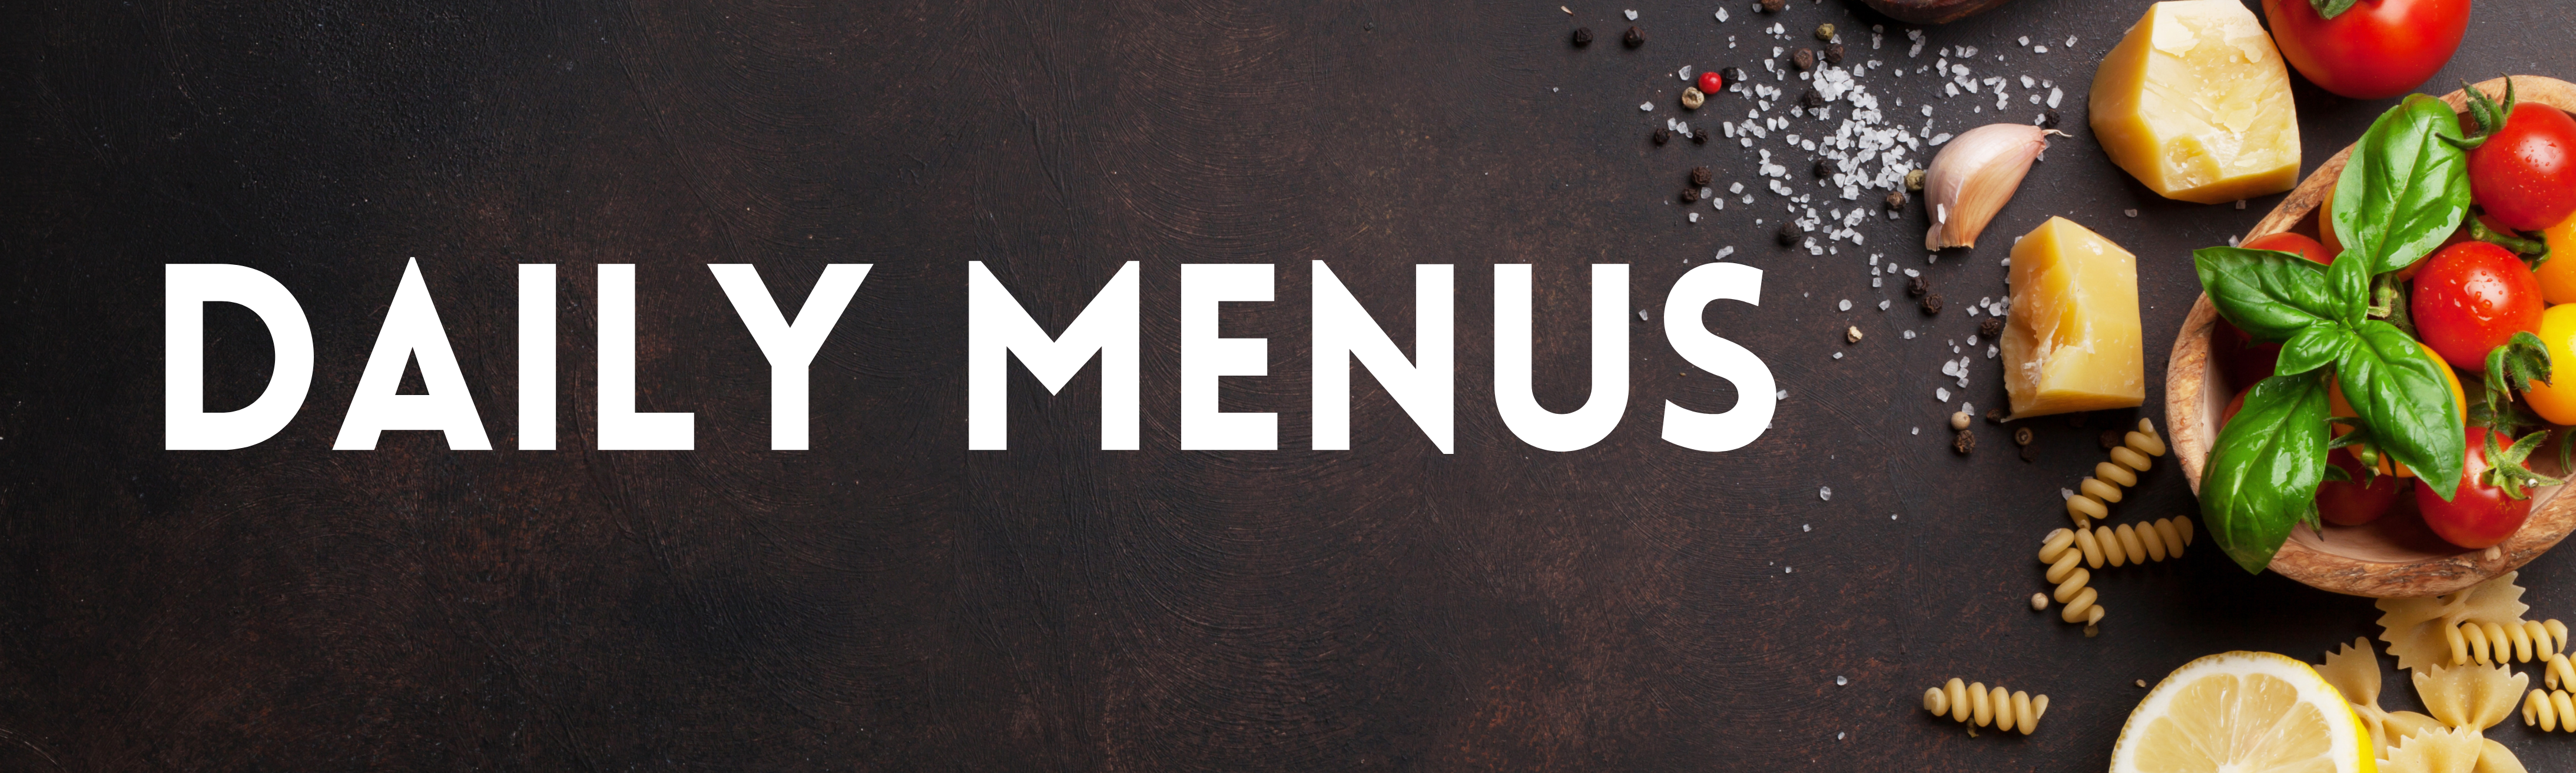 A banner with "Daily Menus" in white text. The background is a photo of a texture counter with pasta ingredients.